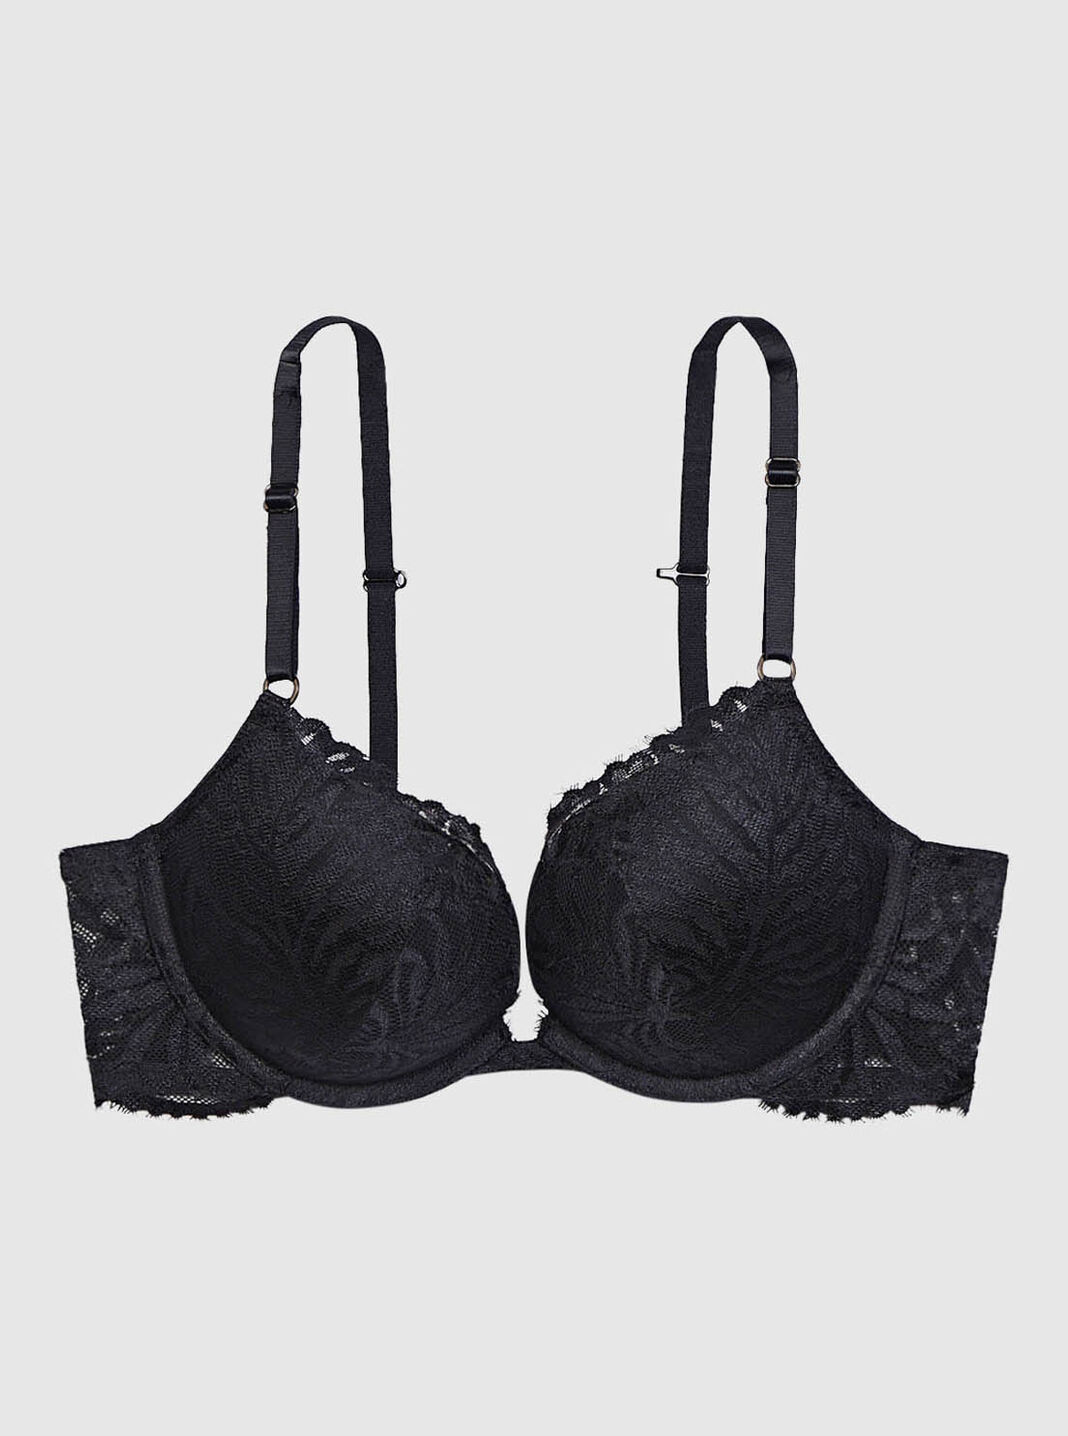 THE SHOW OFF La Senza 32A on tag Sister Sizes: 30B, 34AA Lightly Lined Demi  Cups Removable push-up foams Underwire for support Back closure Adjustable  Strap Like New!, Women's Fashion, Undergarments 